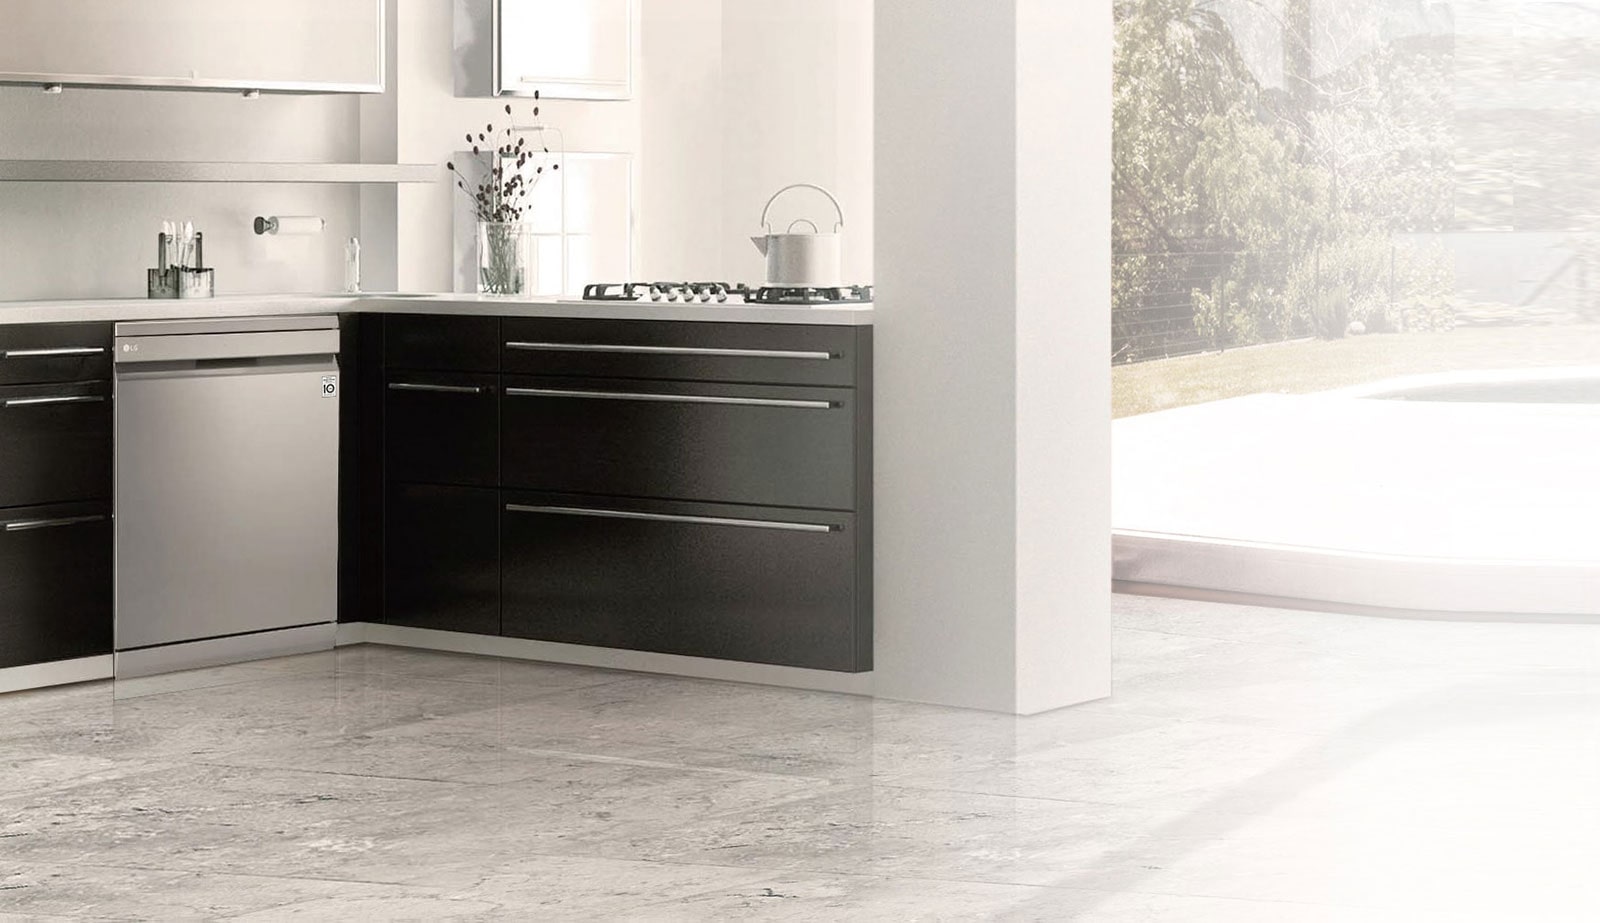 Upgrade the Look of Your Kitchen<br>1